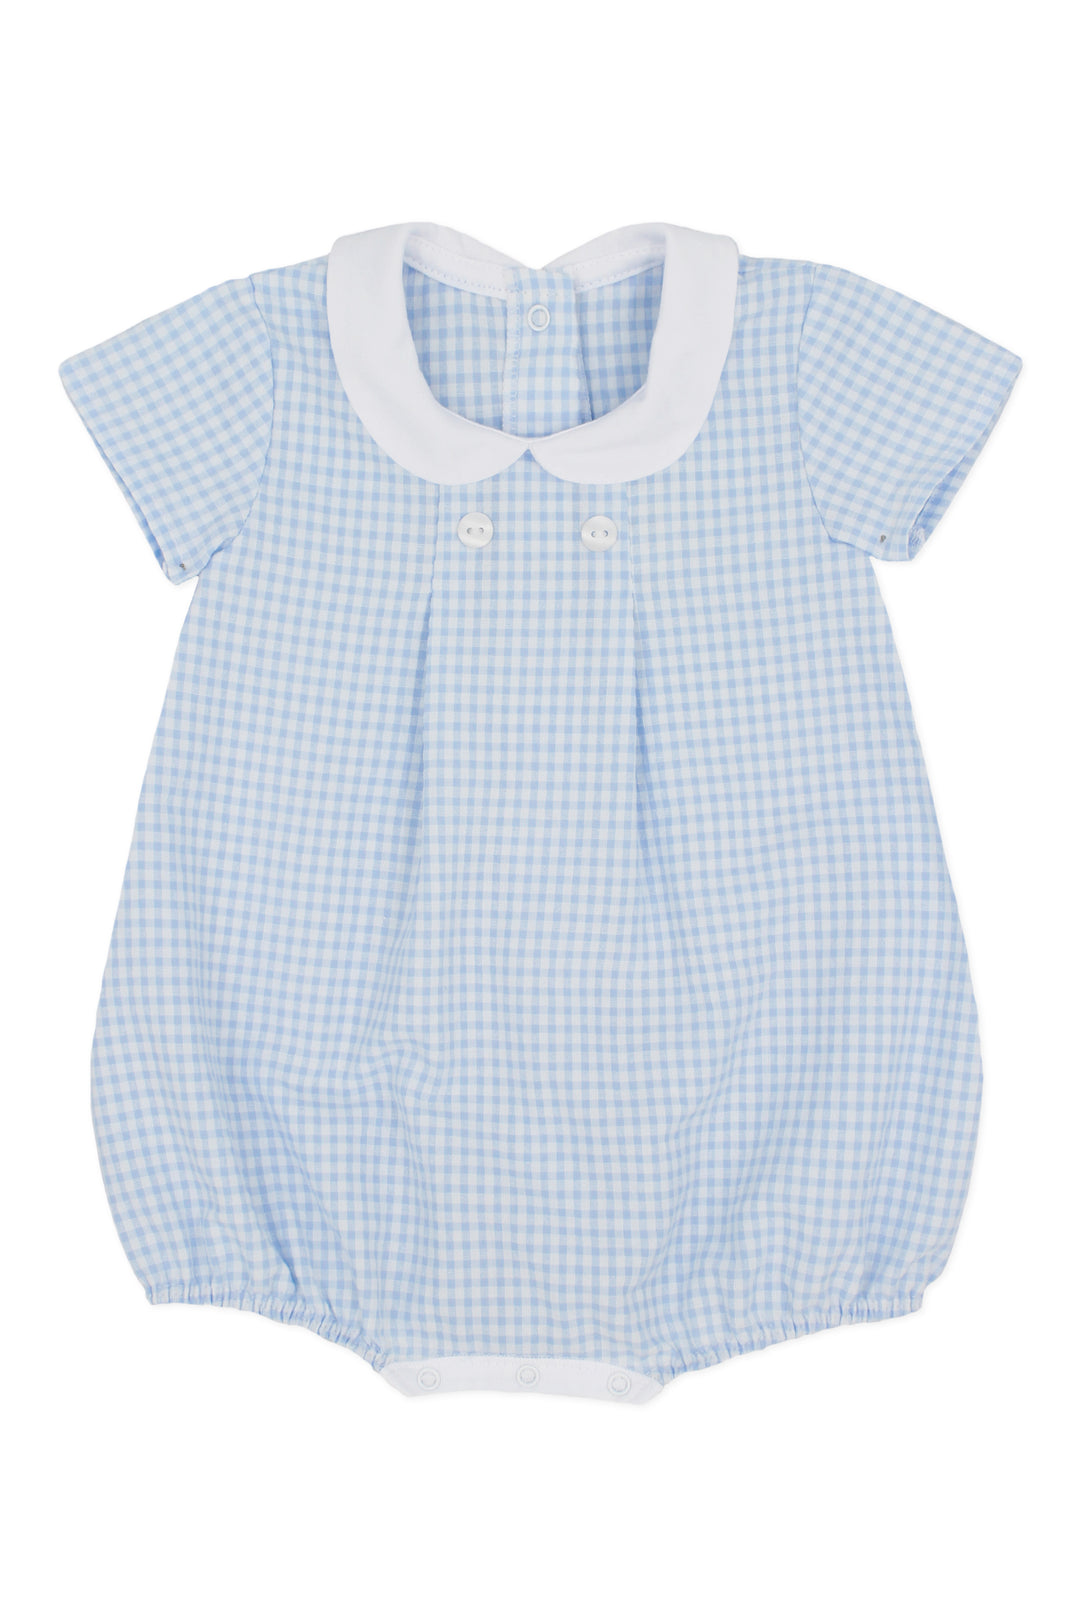 Rapife "Percy" Blue Gingham Romper | iphoneandroidapplications